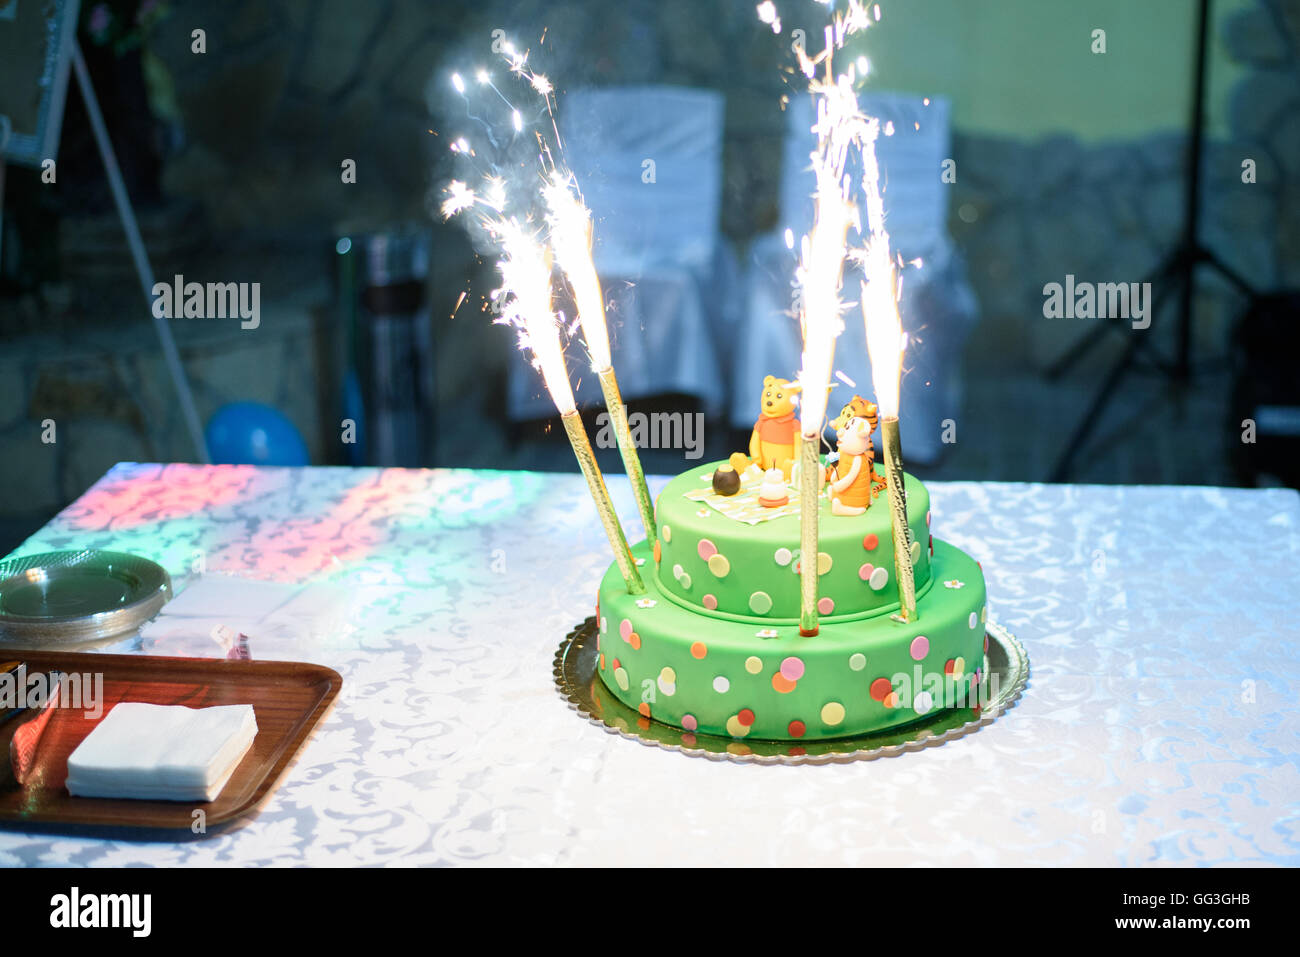 Birthday cake with candles and Winnie the Pooh by Disney Stock Photo